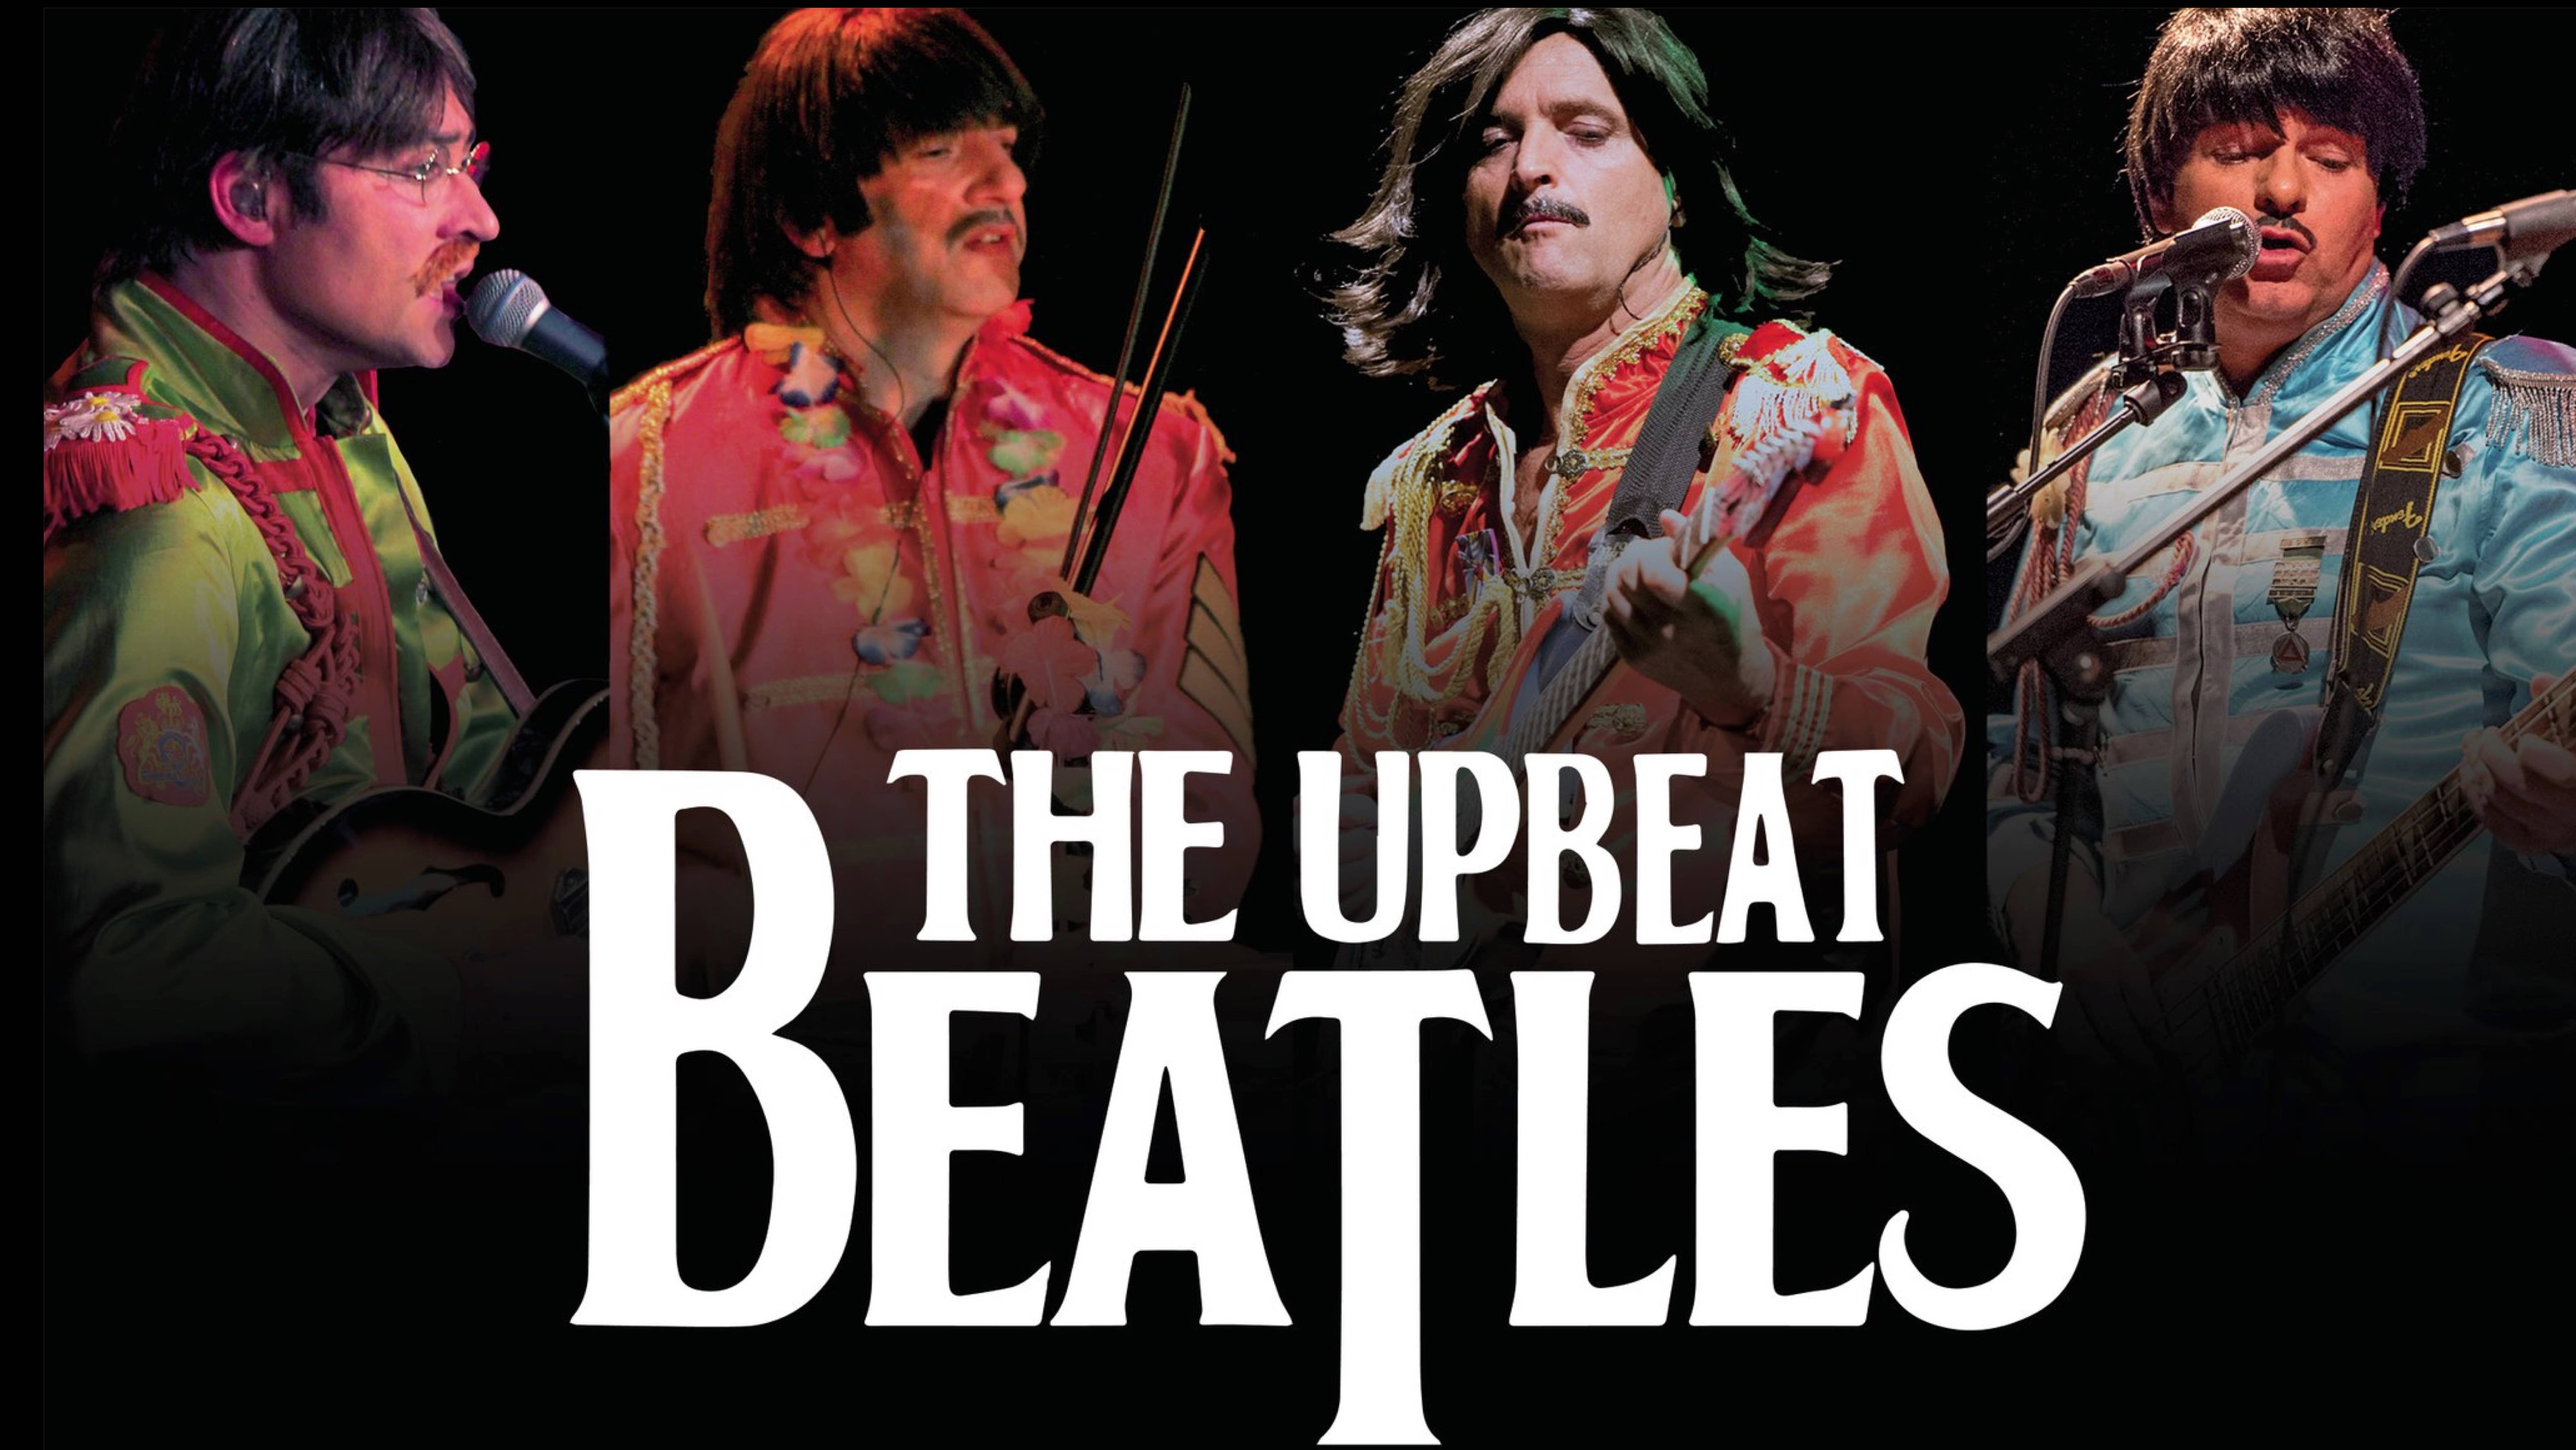 THE BEATLES GREATEST HITS with leading live tribute The Upbeat Beatles